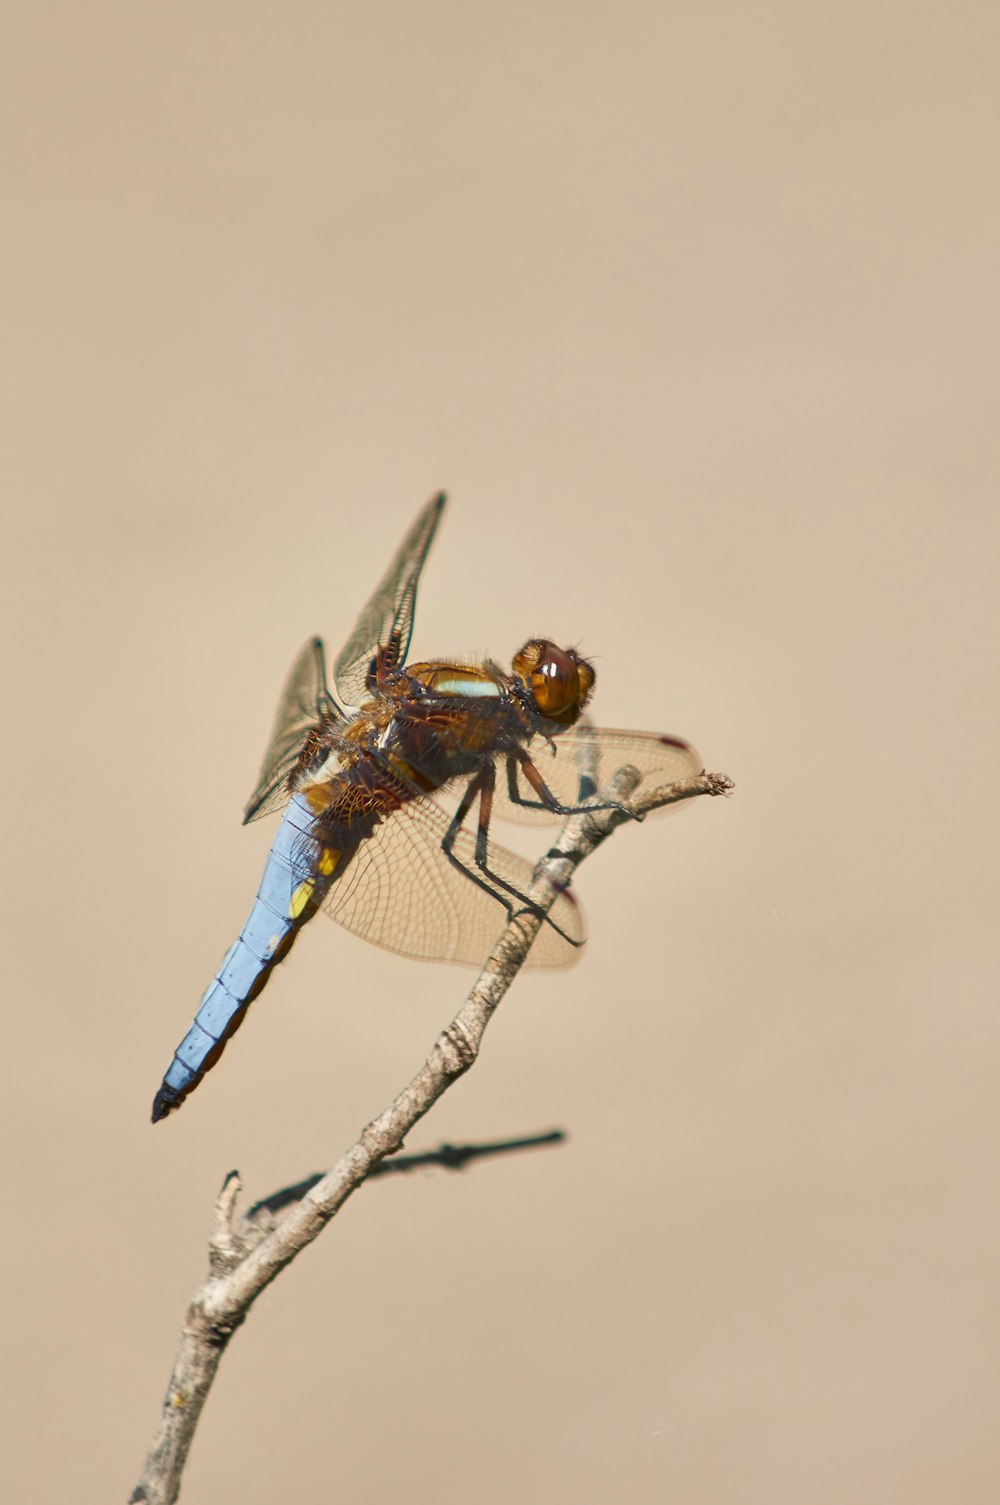 blue and brown dragonfly perched on brown stem in close up photography during daytime